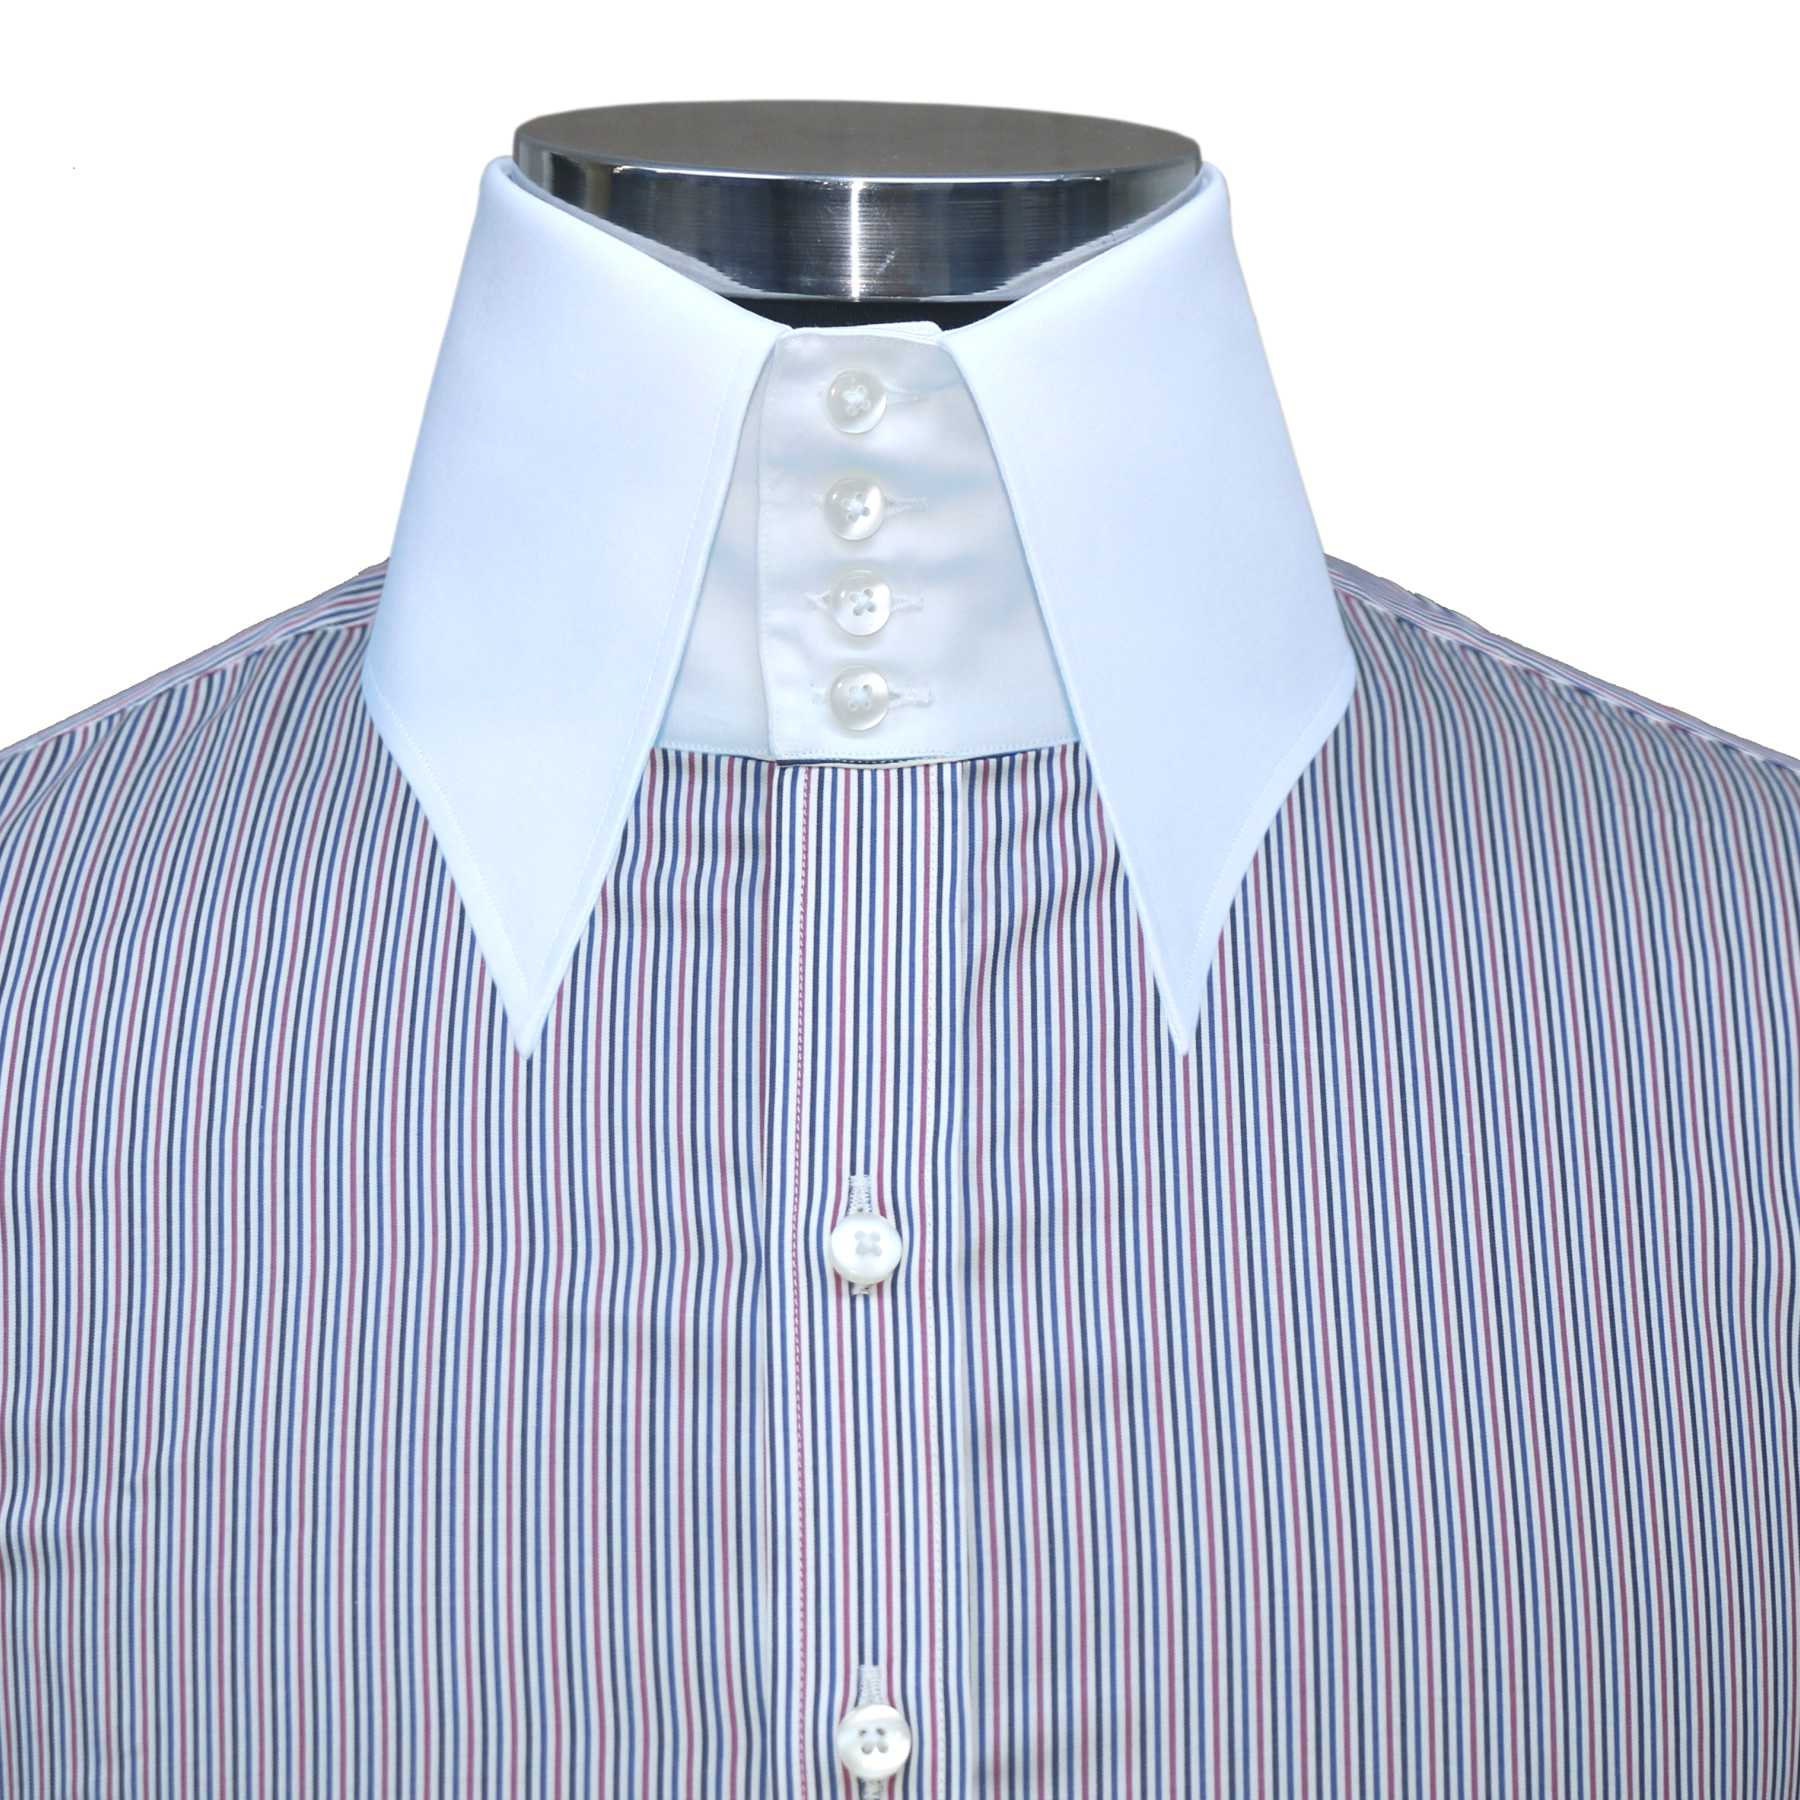 3 Collar 4 Buttons Shirt Tall Neck Multicolored - Etsy